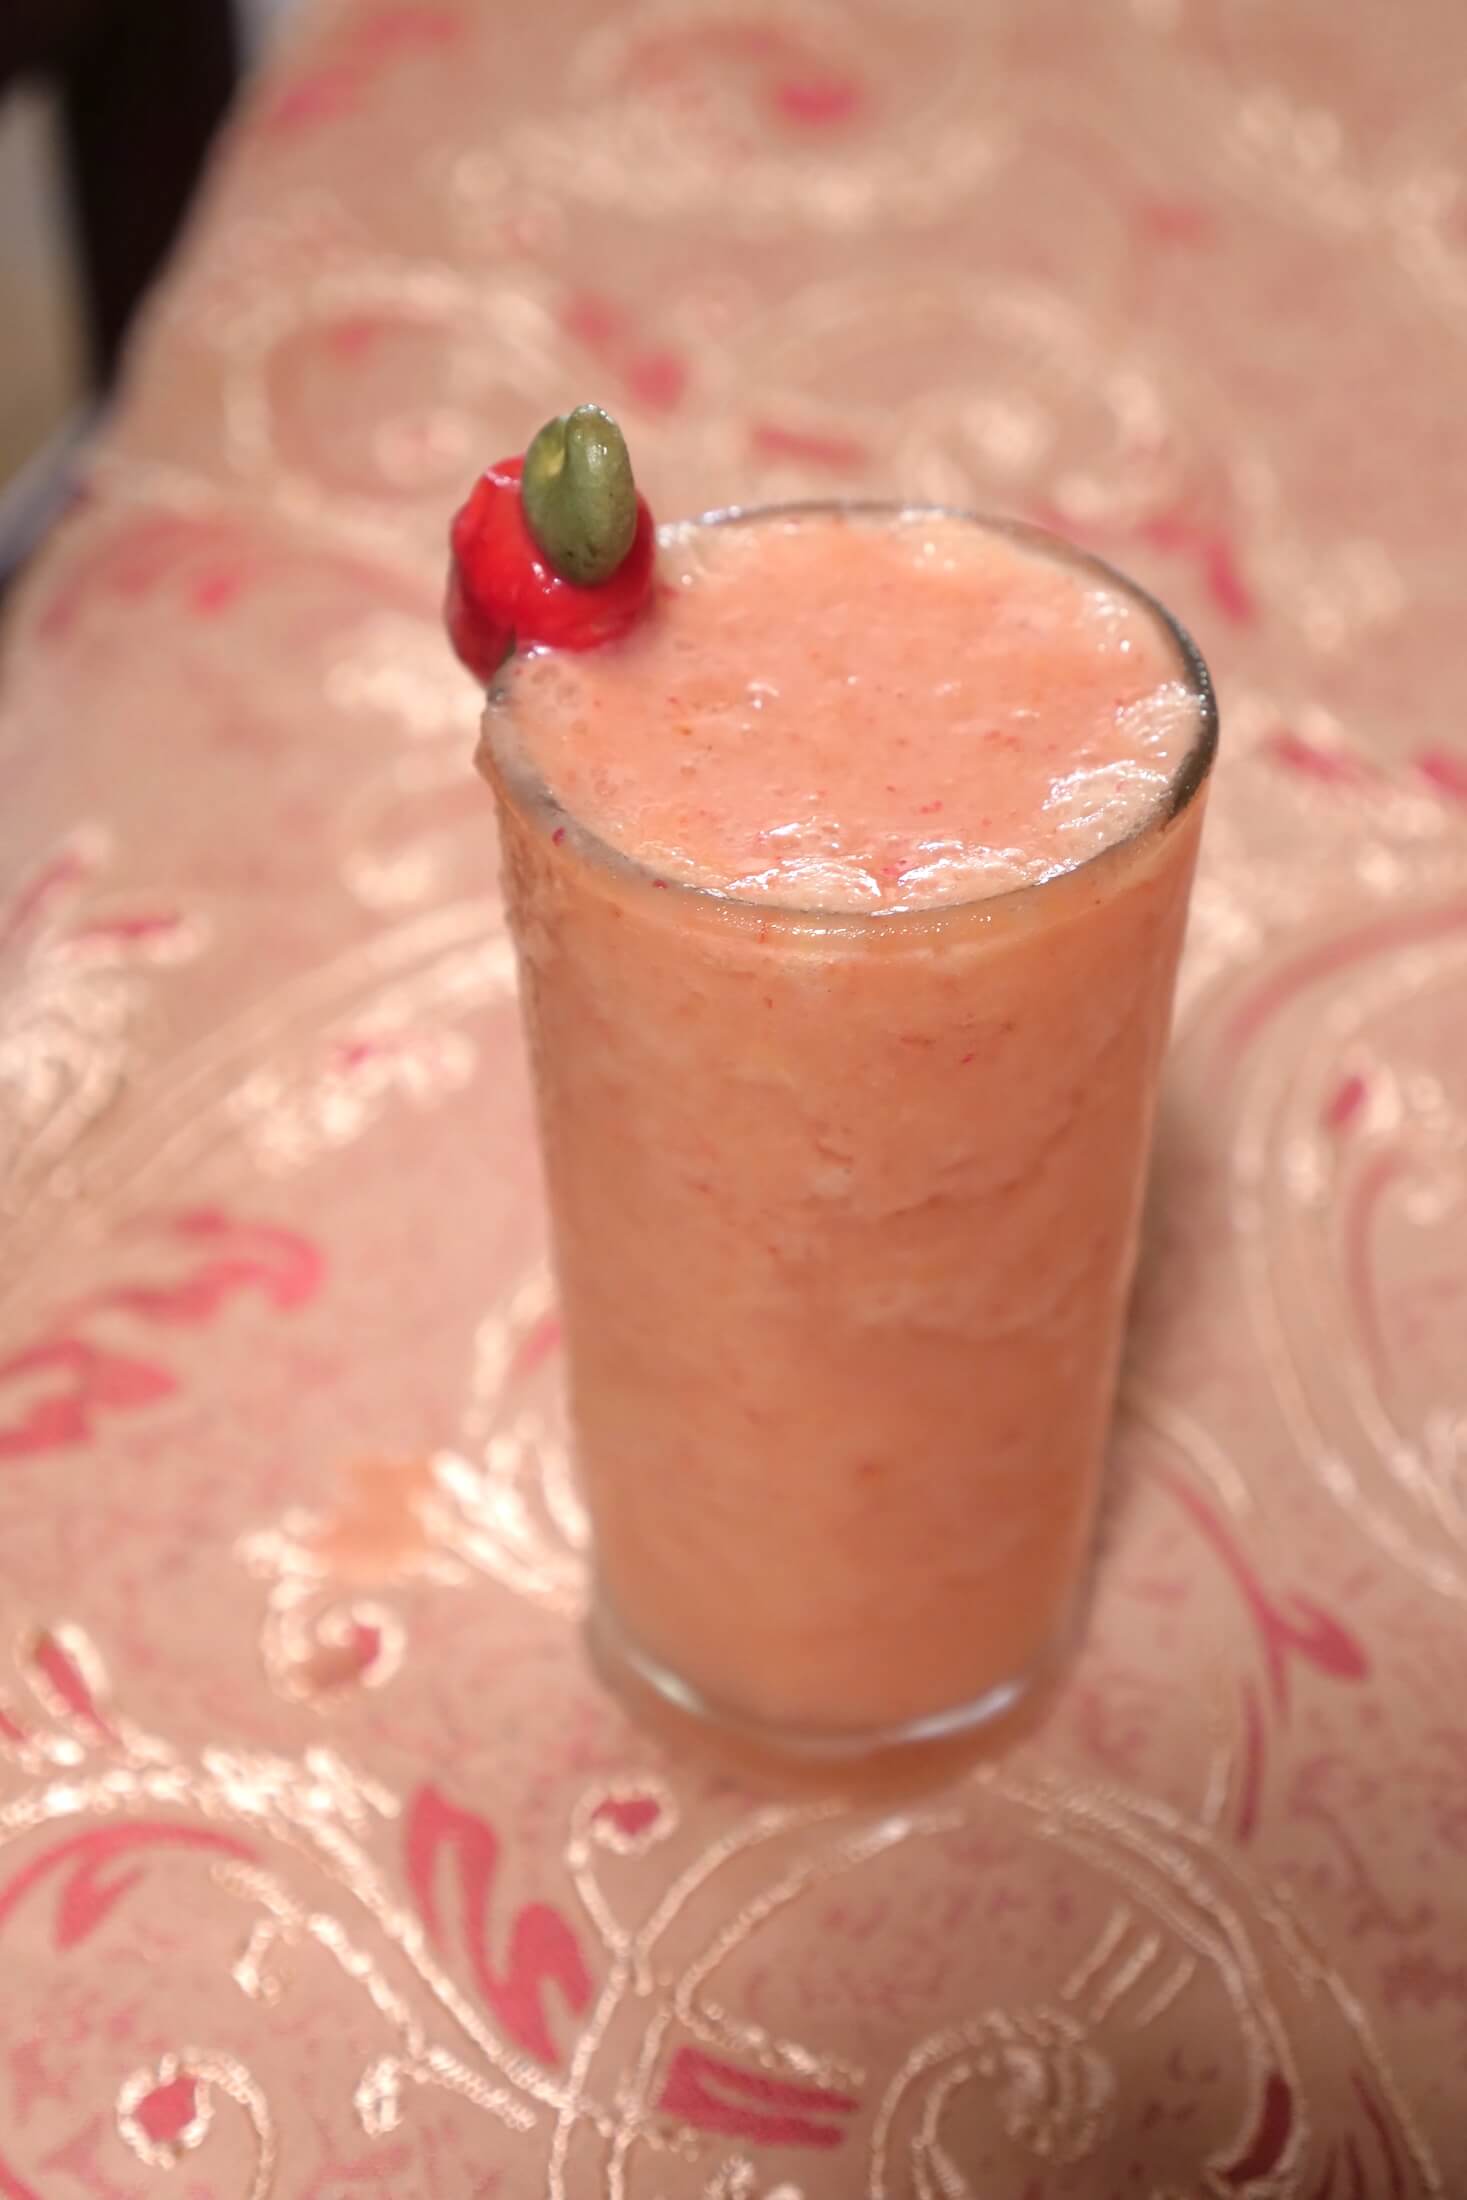 A cashew fruit and fruit juice shake, delicious